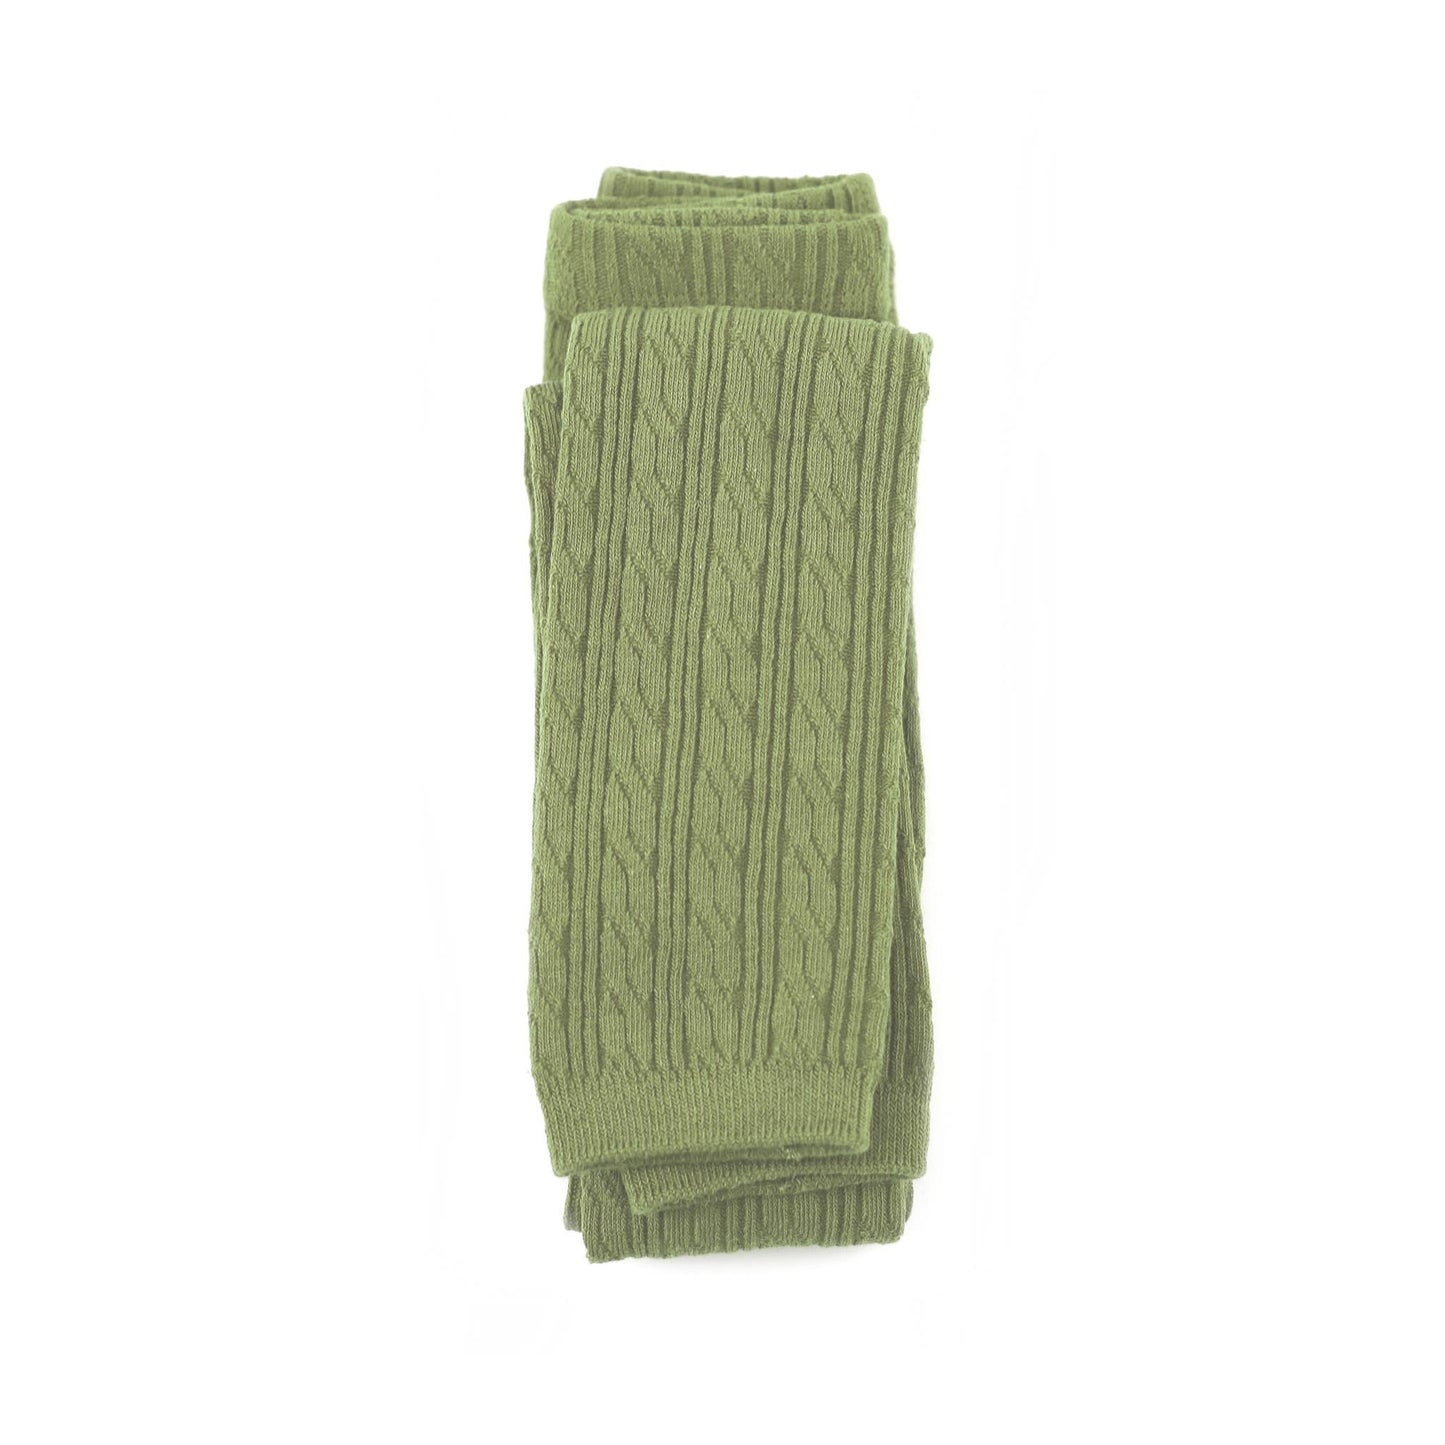 Basil Cable Knit Footless Tights: 1 - 2 Years